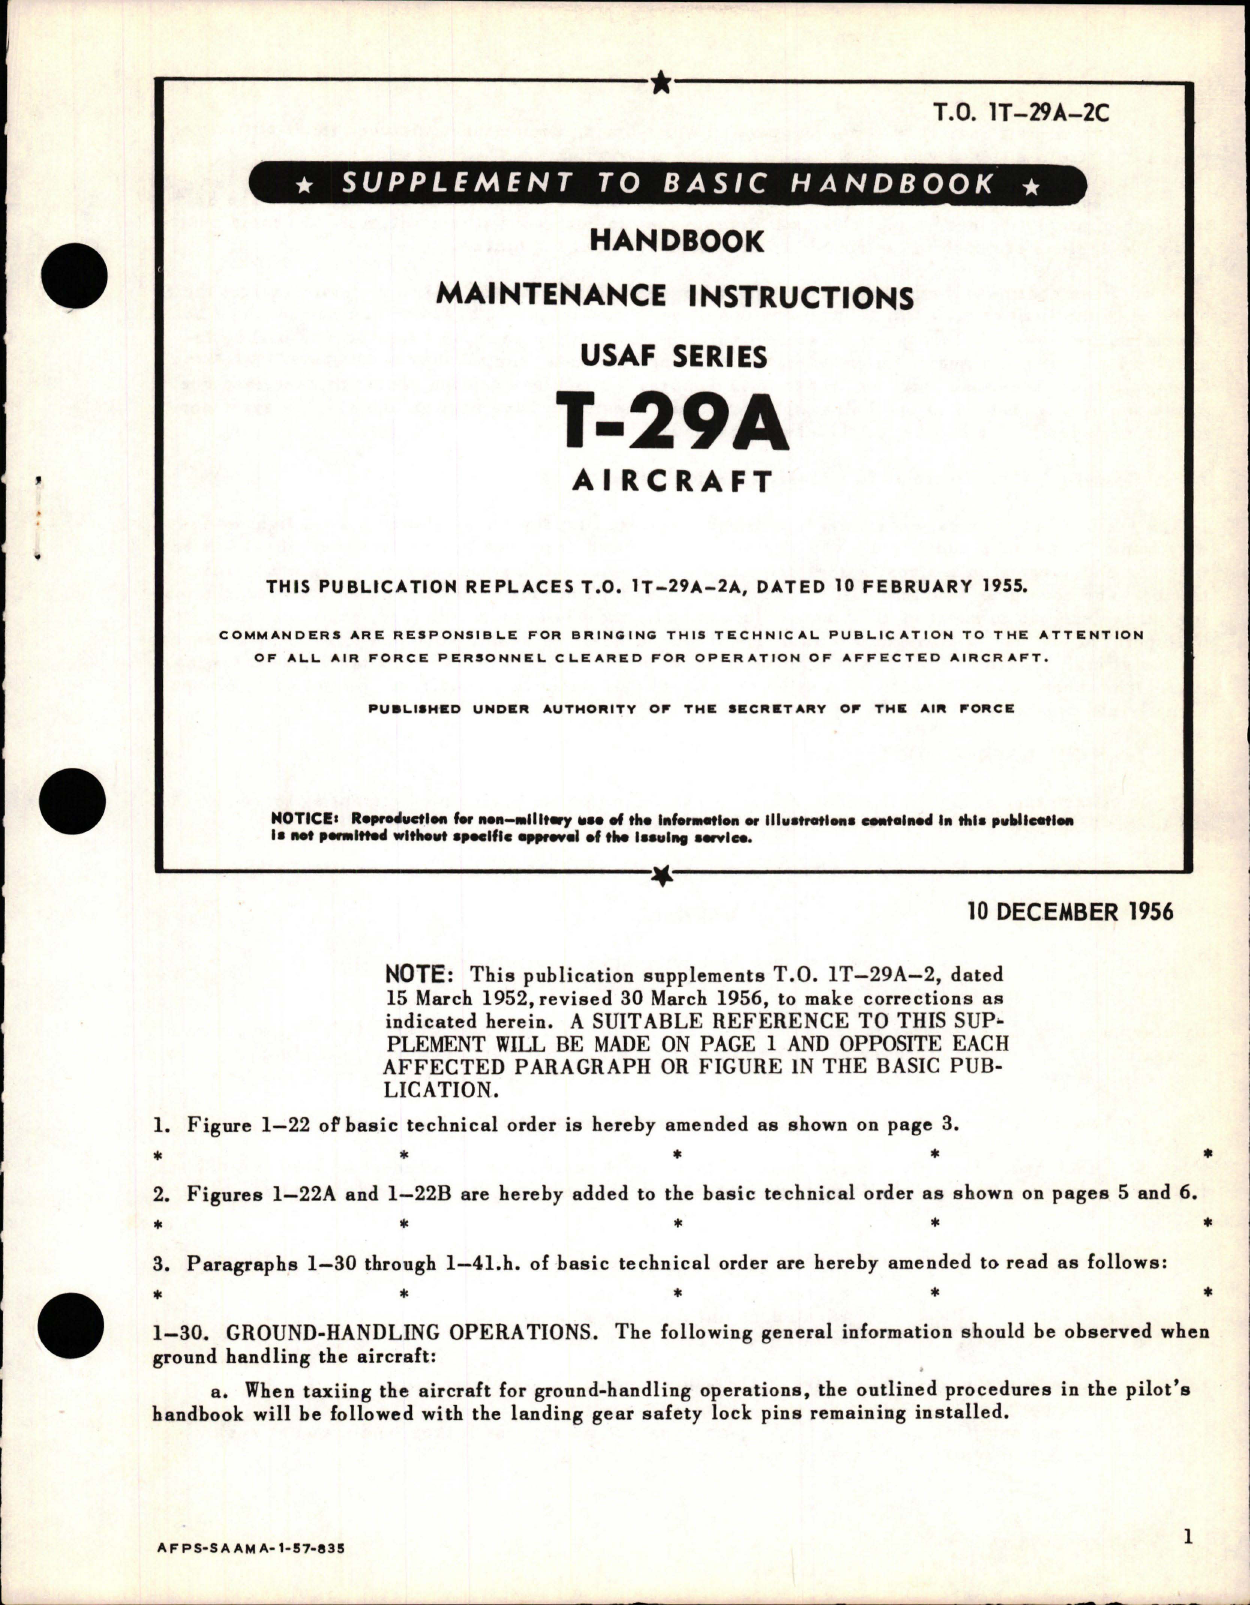 Sample page 1 from AirCorps Library document: Supplement to Maintenance Instructions for T-29A